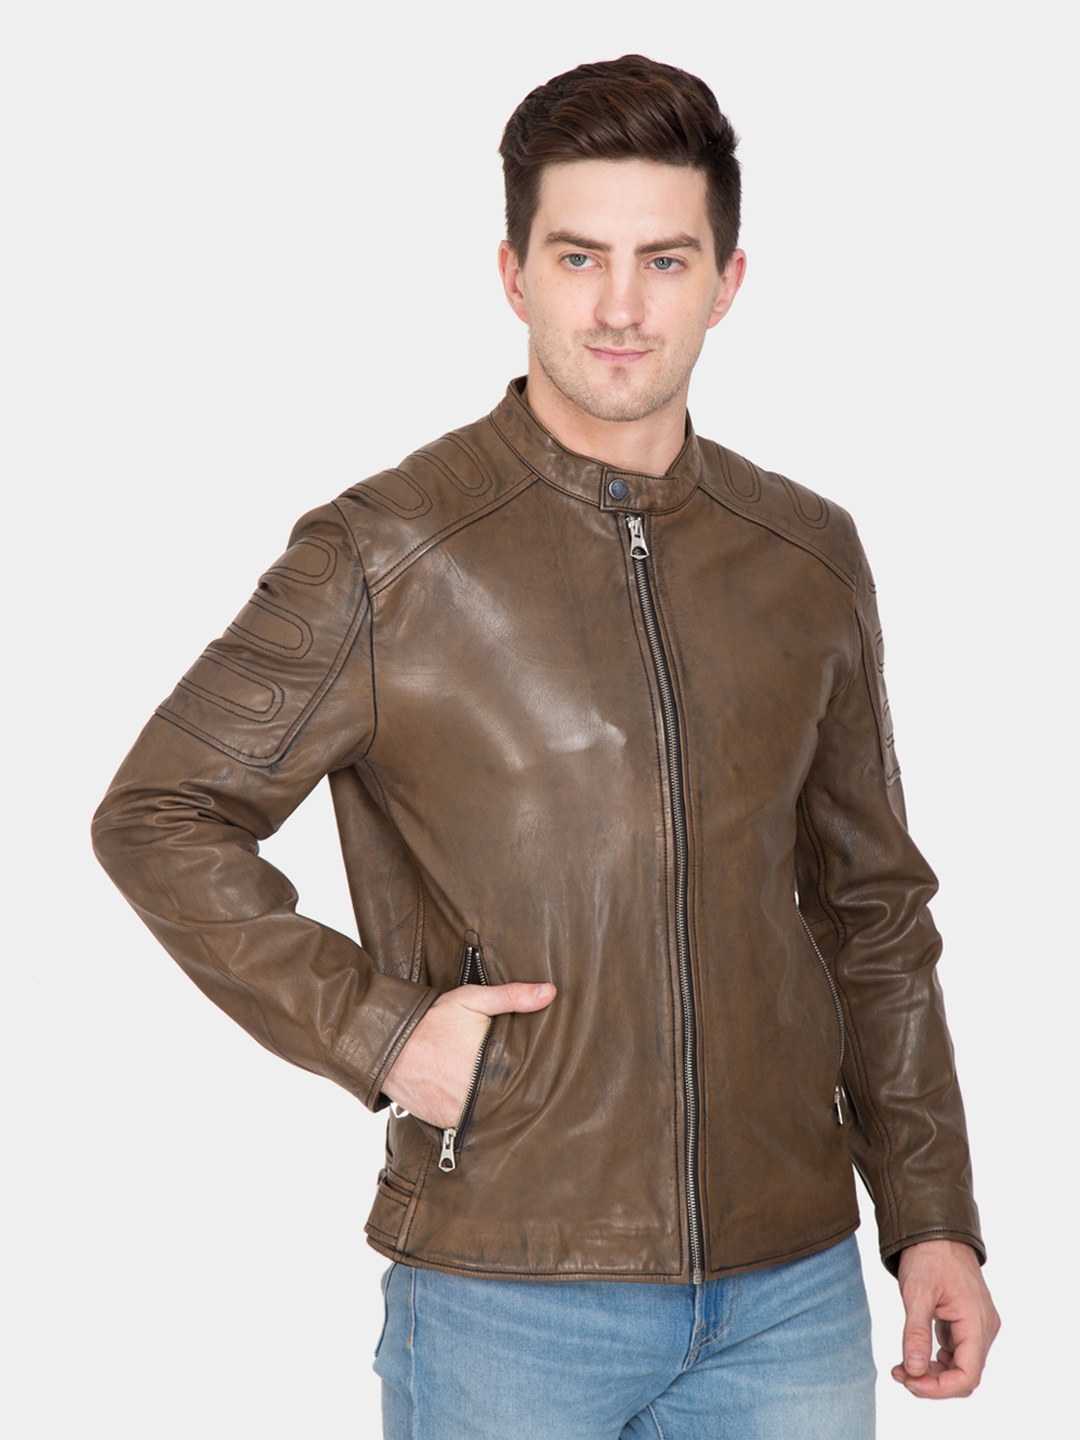 Justanned | JUSTANNED CAROB TAN LEATHER JACKET 1